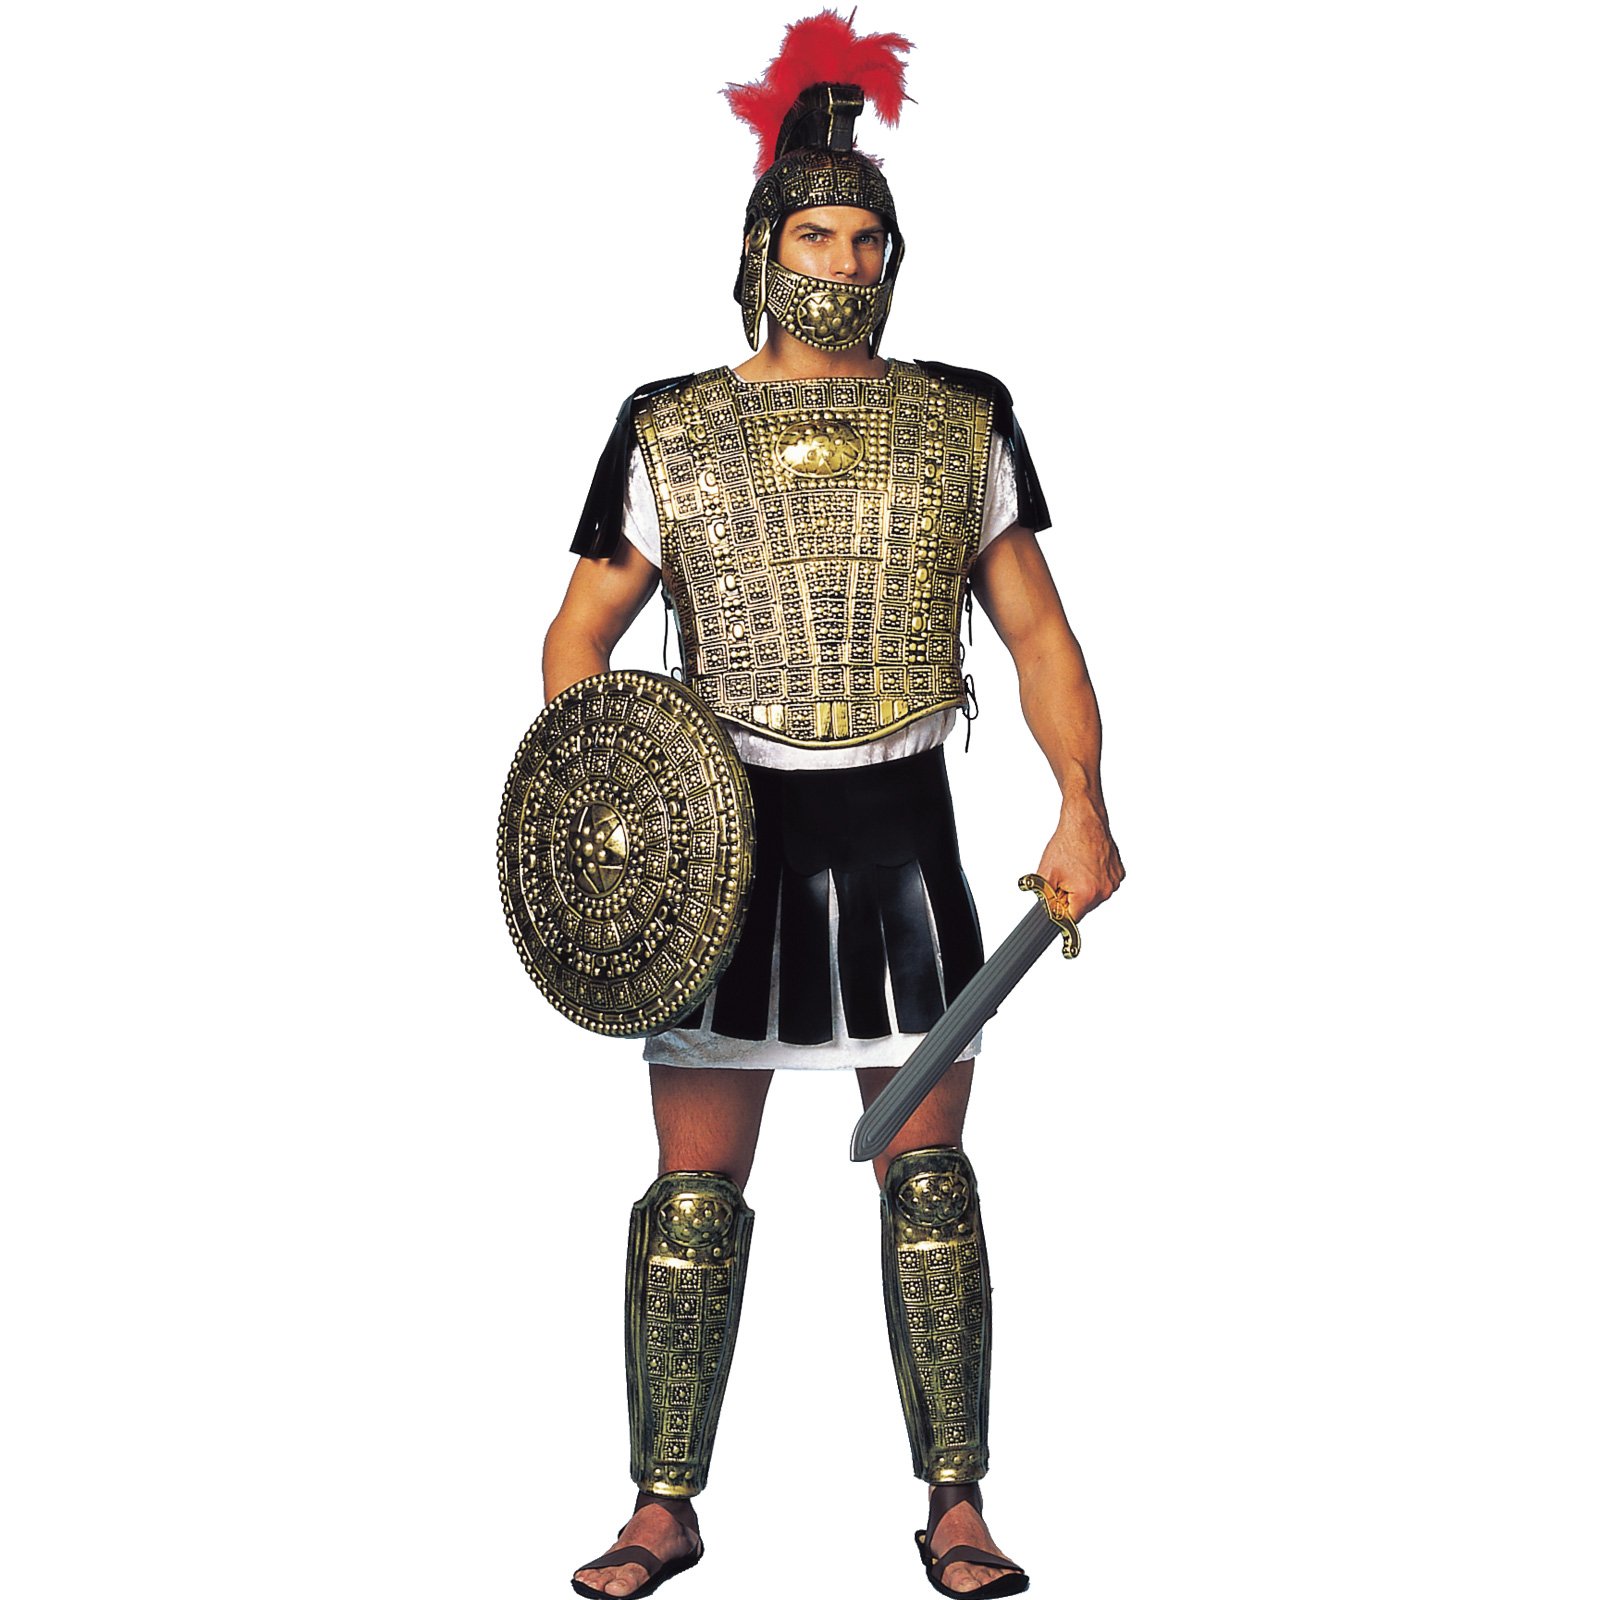 Picture Of A Roman Soldier - Cliparts.co